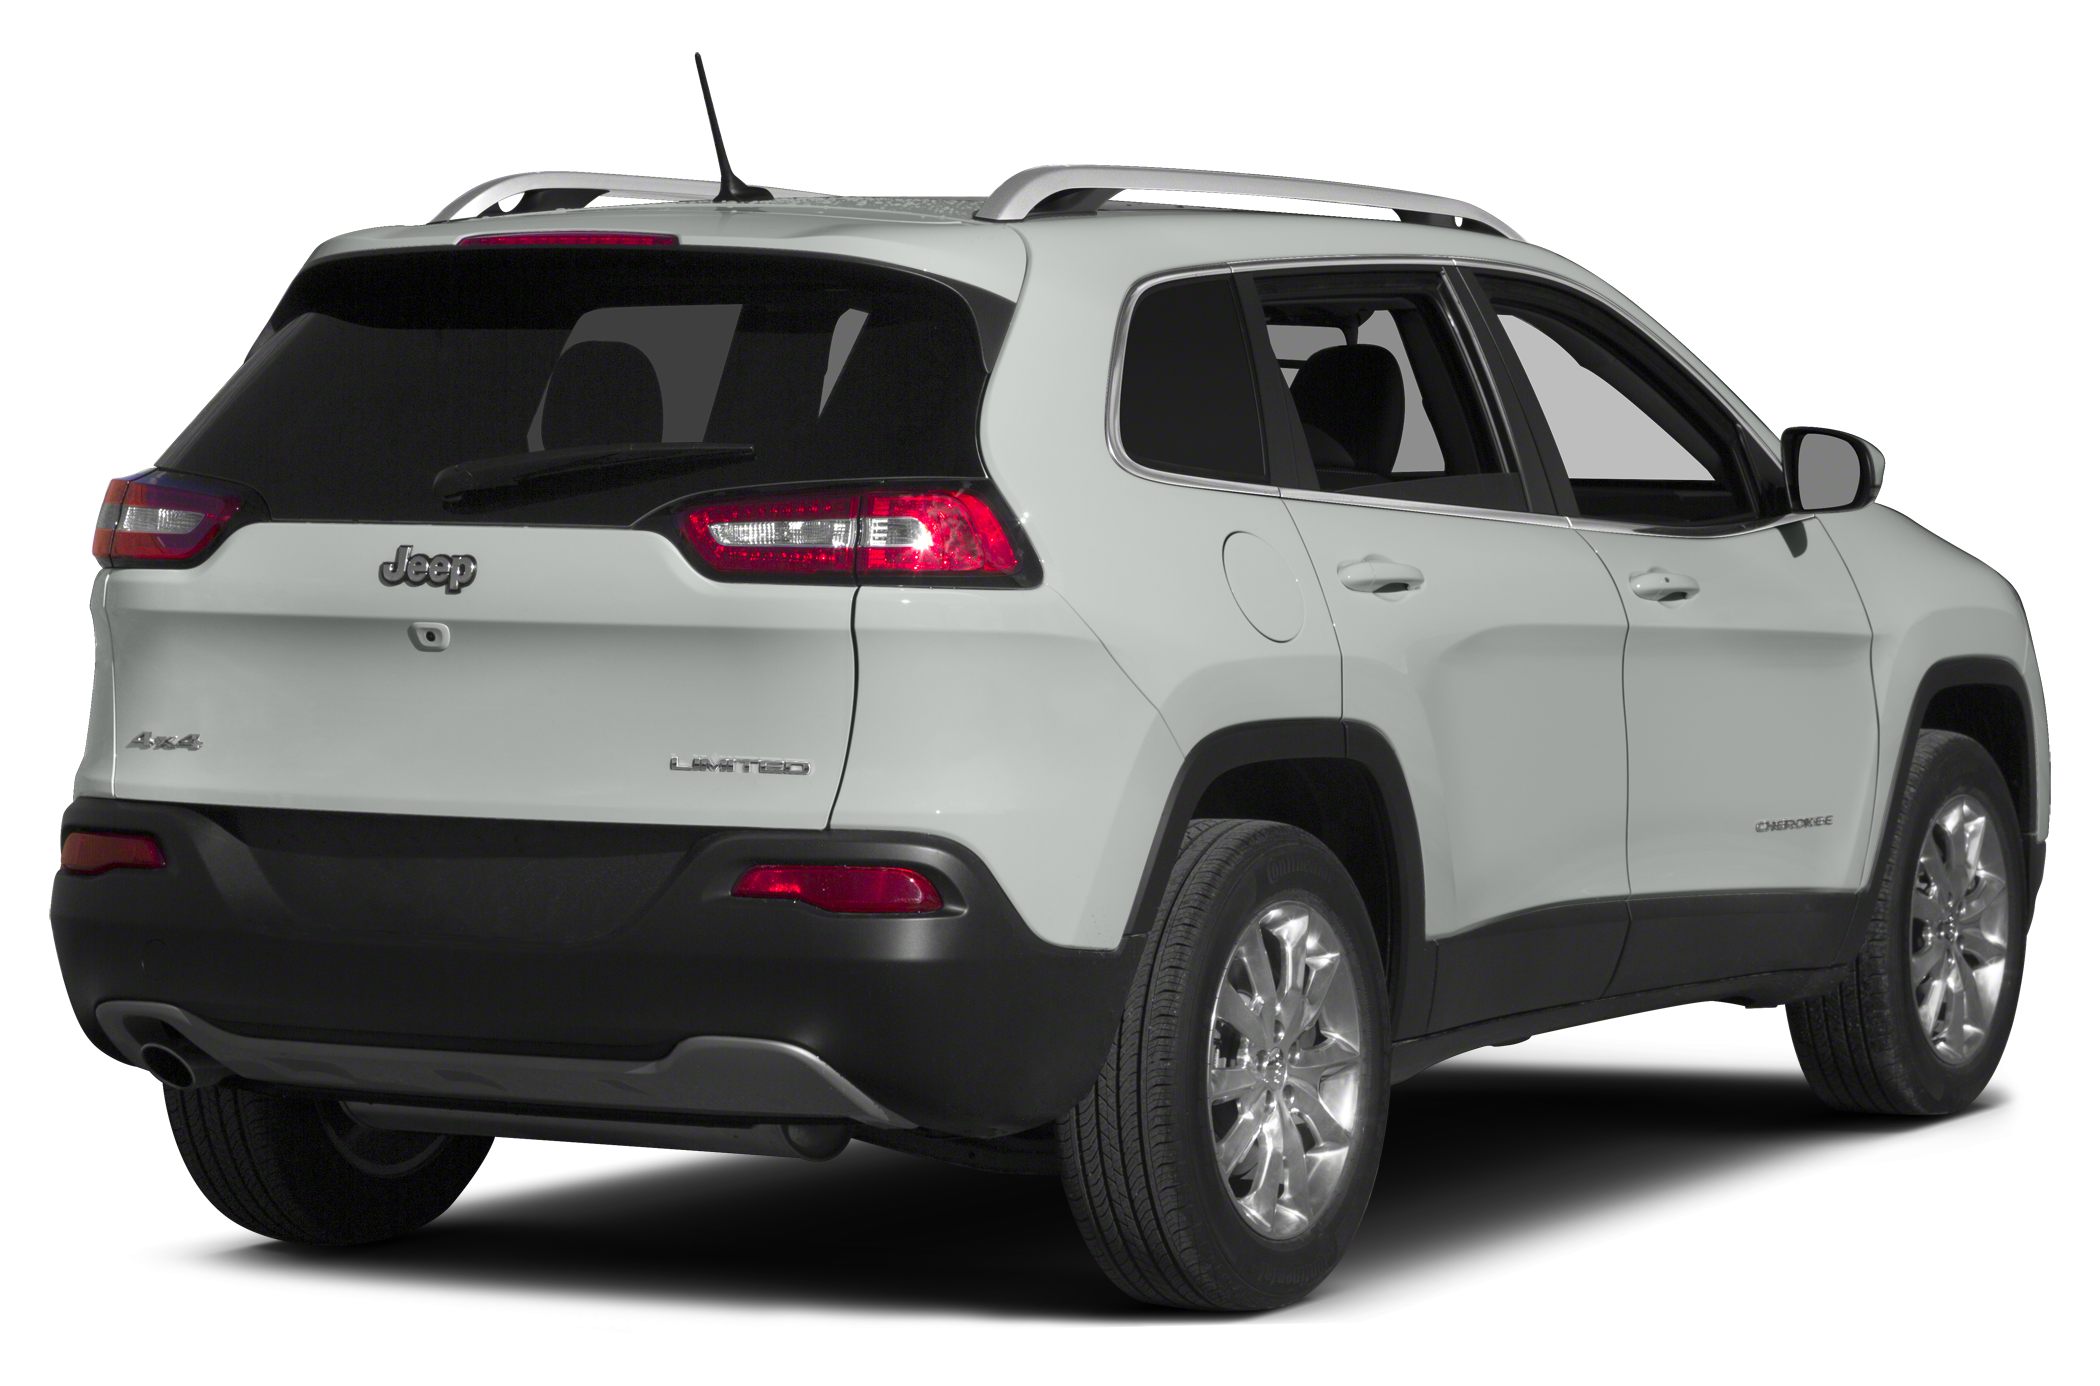 Jeep Cherokee New Model Car Pictures